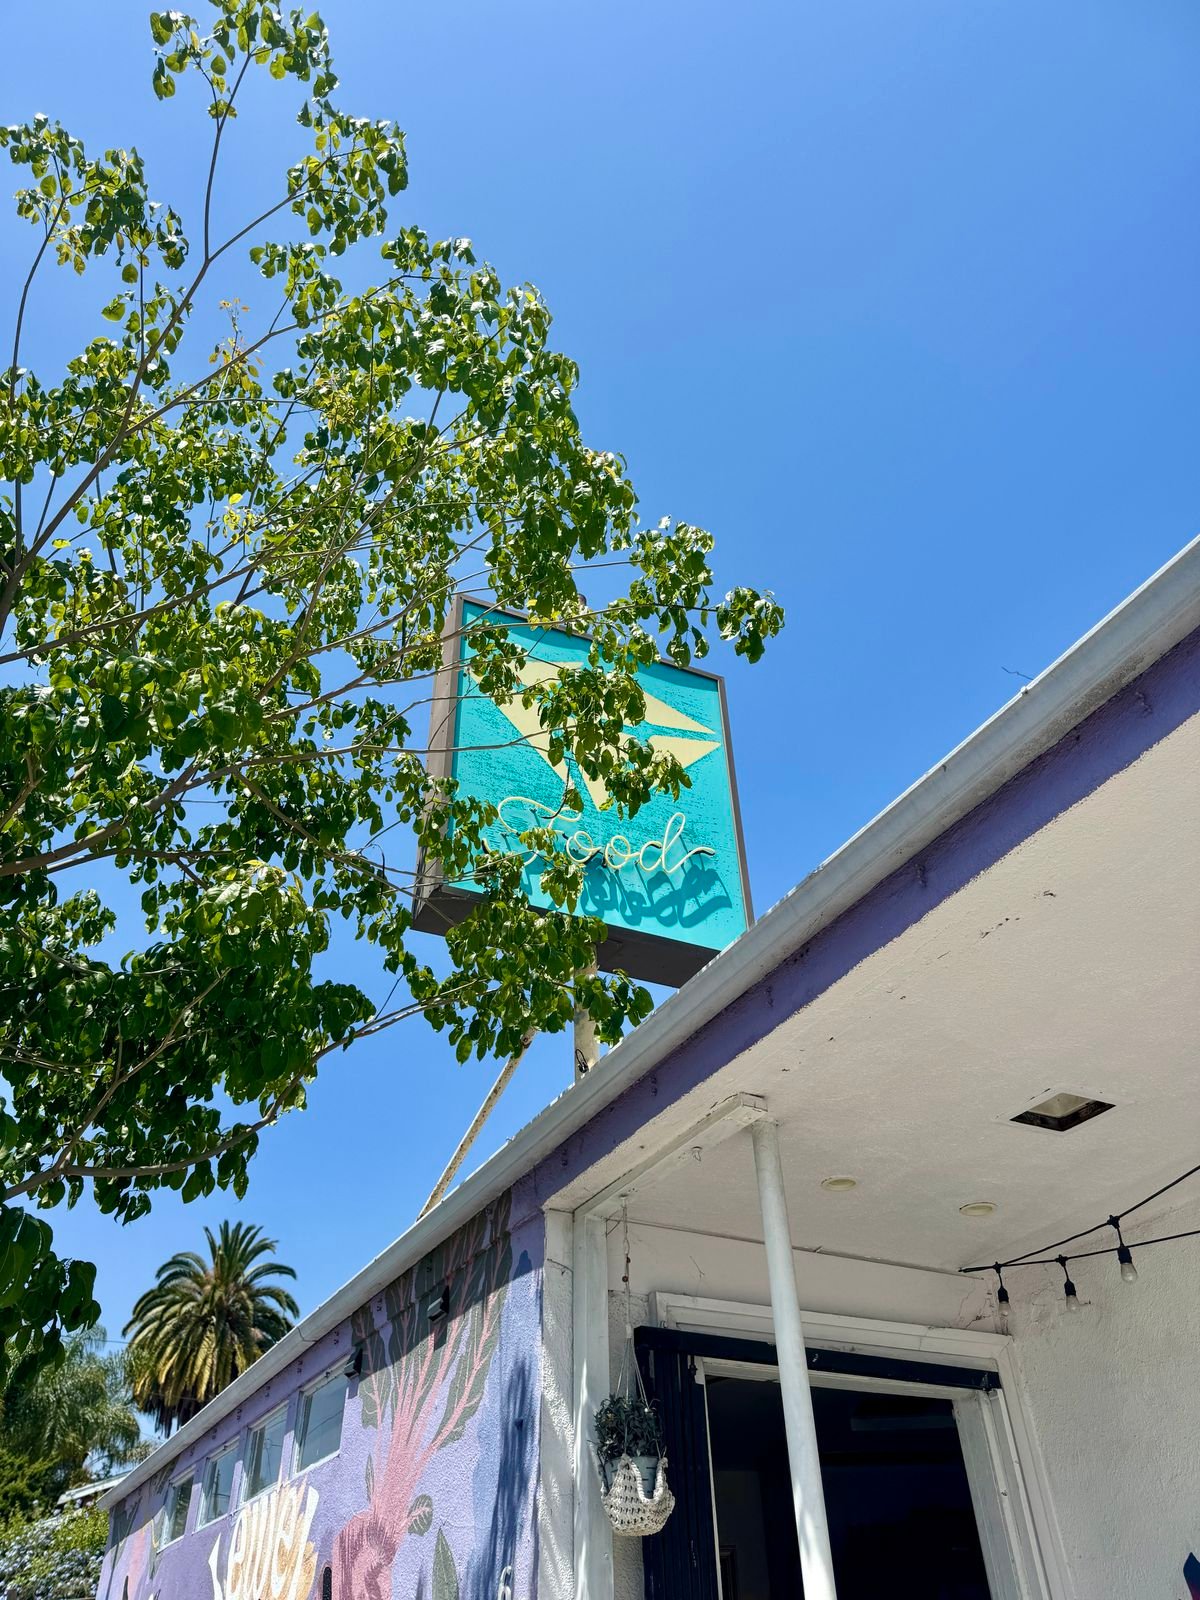 Turquoise Jewel sign above the restaurant covered partially by trees